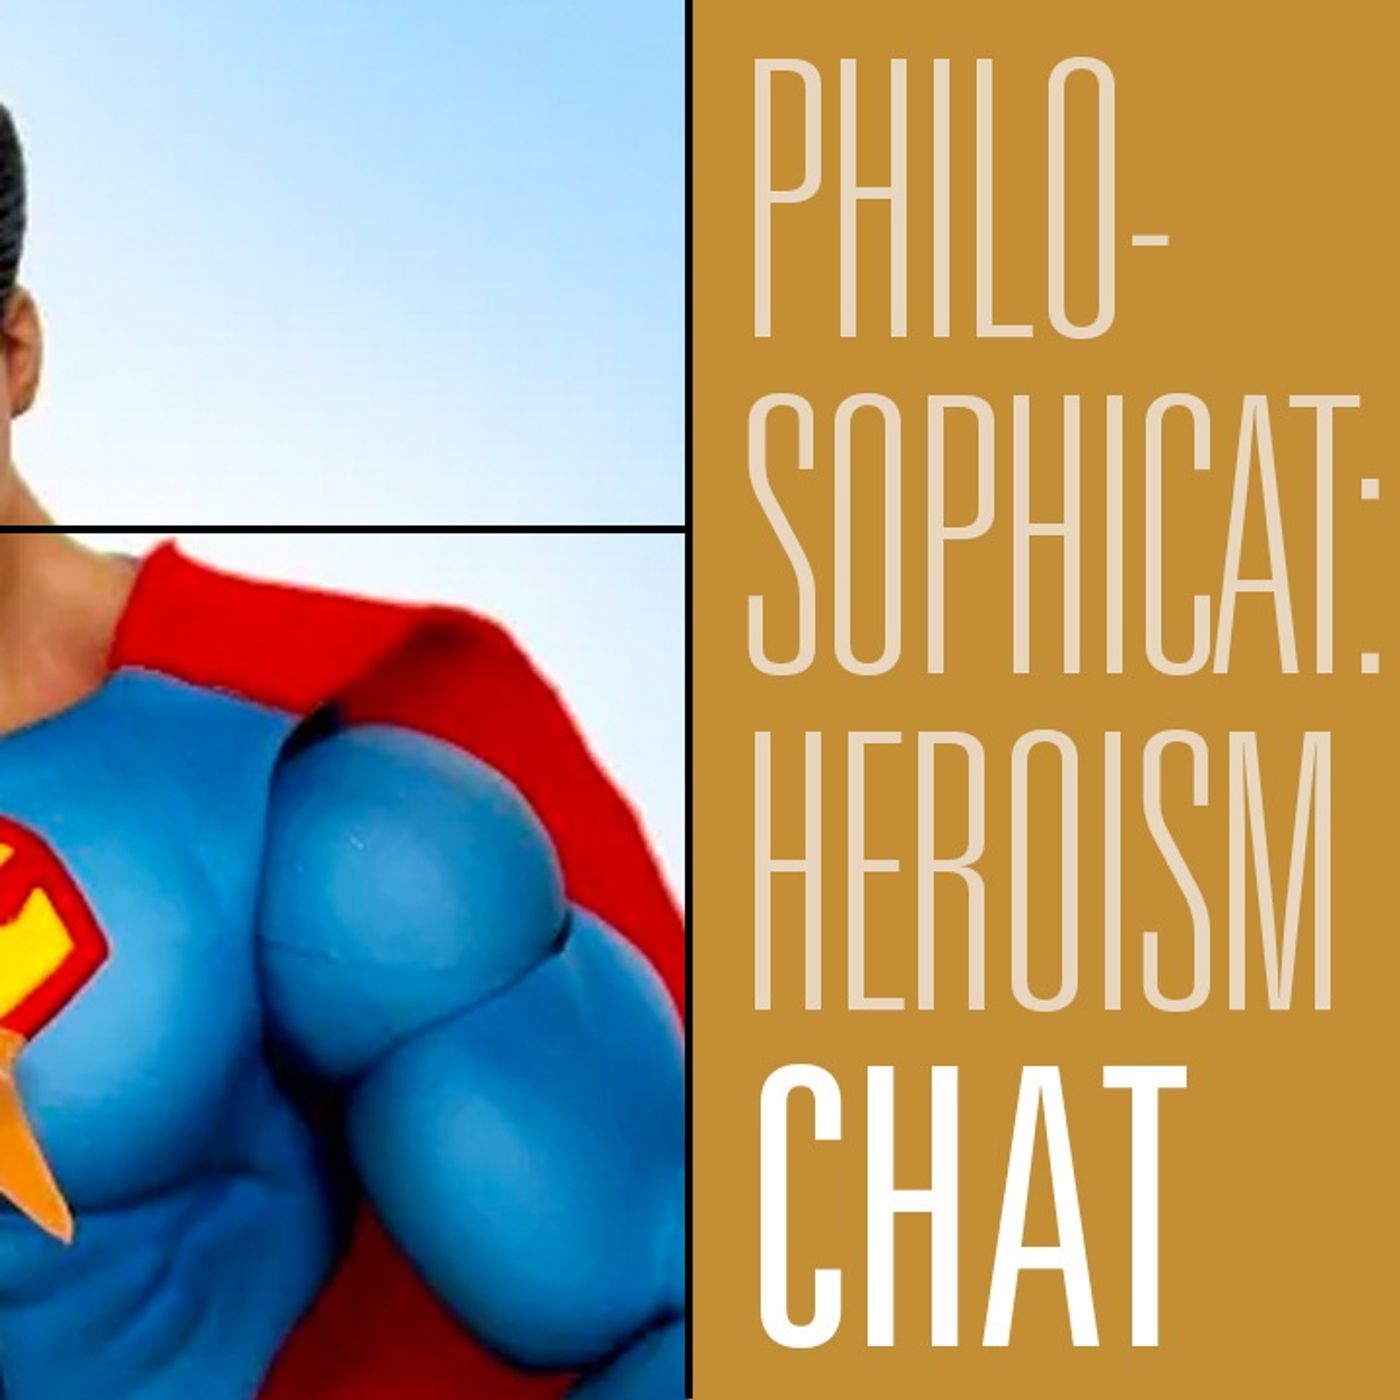 Speaking With YouTuber PhilosophiCat on the State of Men and Heroism | Fireside Chat 209